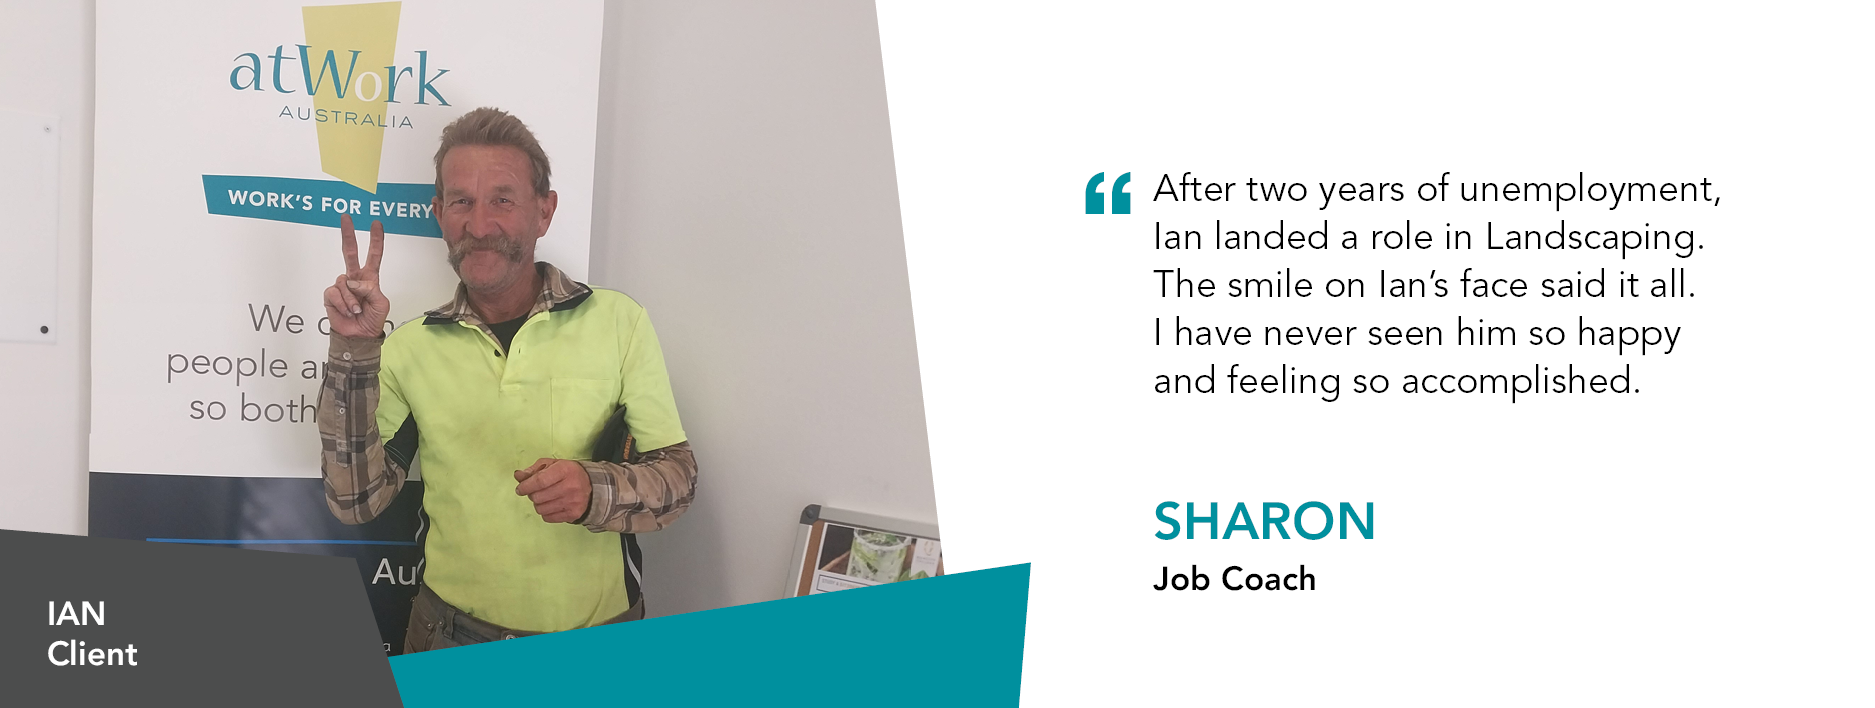 Ian gives the peace sign, dressed in his high-vis shirt. Quote reads "After two years of unemployment, Ian landed a role in landscaping. The smile on Ian's face said it all. I have never seen him so happy and feeling accomplished." said Sharon, his Job Coach